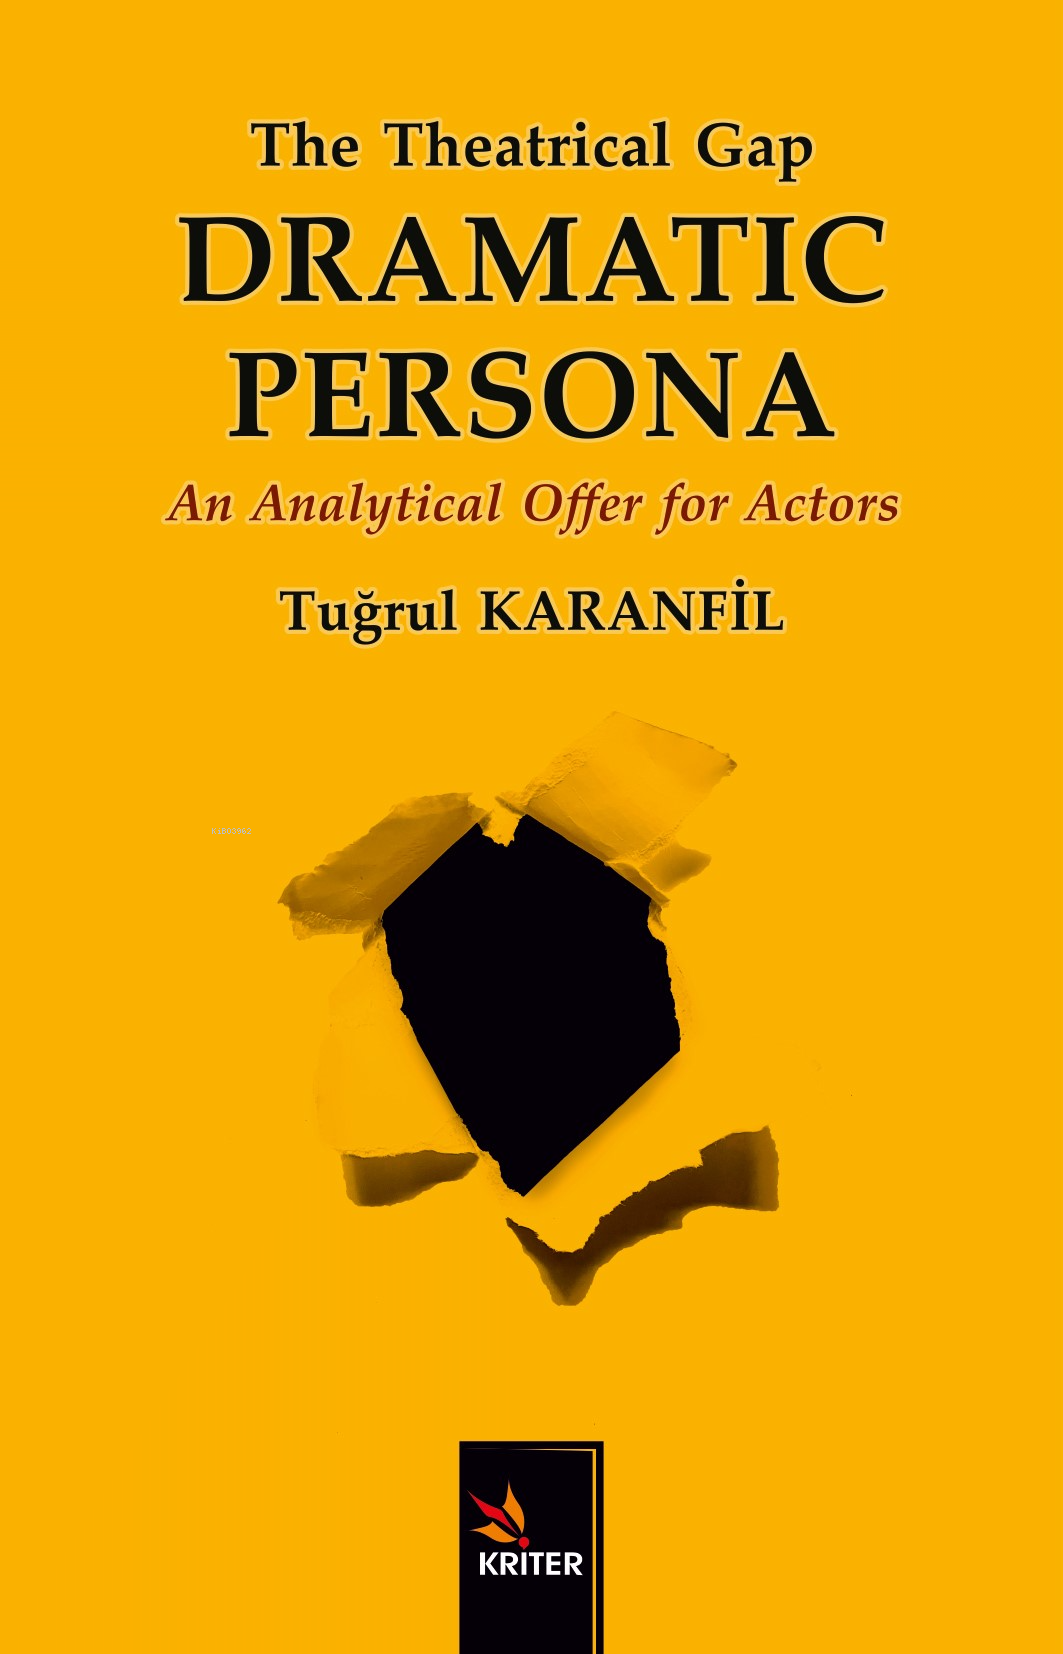 The Theatrical Gap Dramatıc Persona;An Analytical Offer for Actors